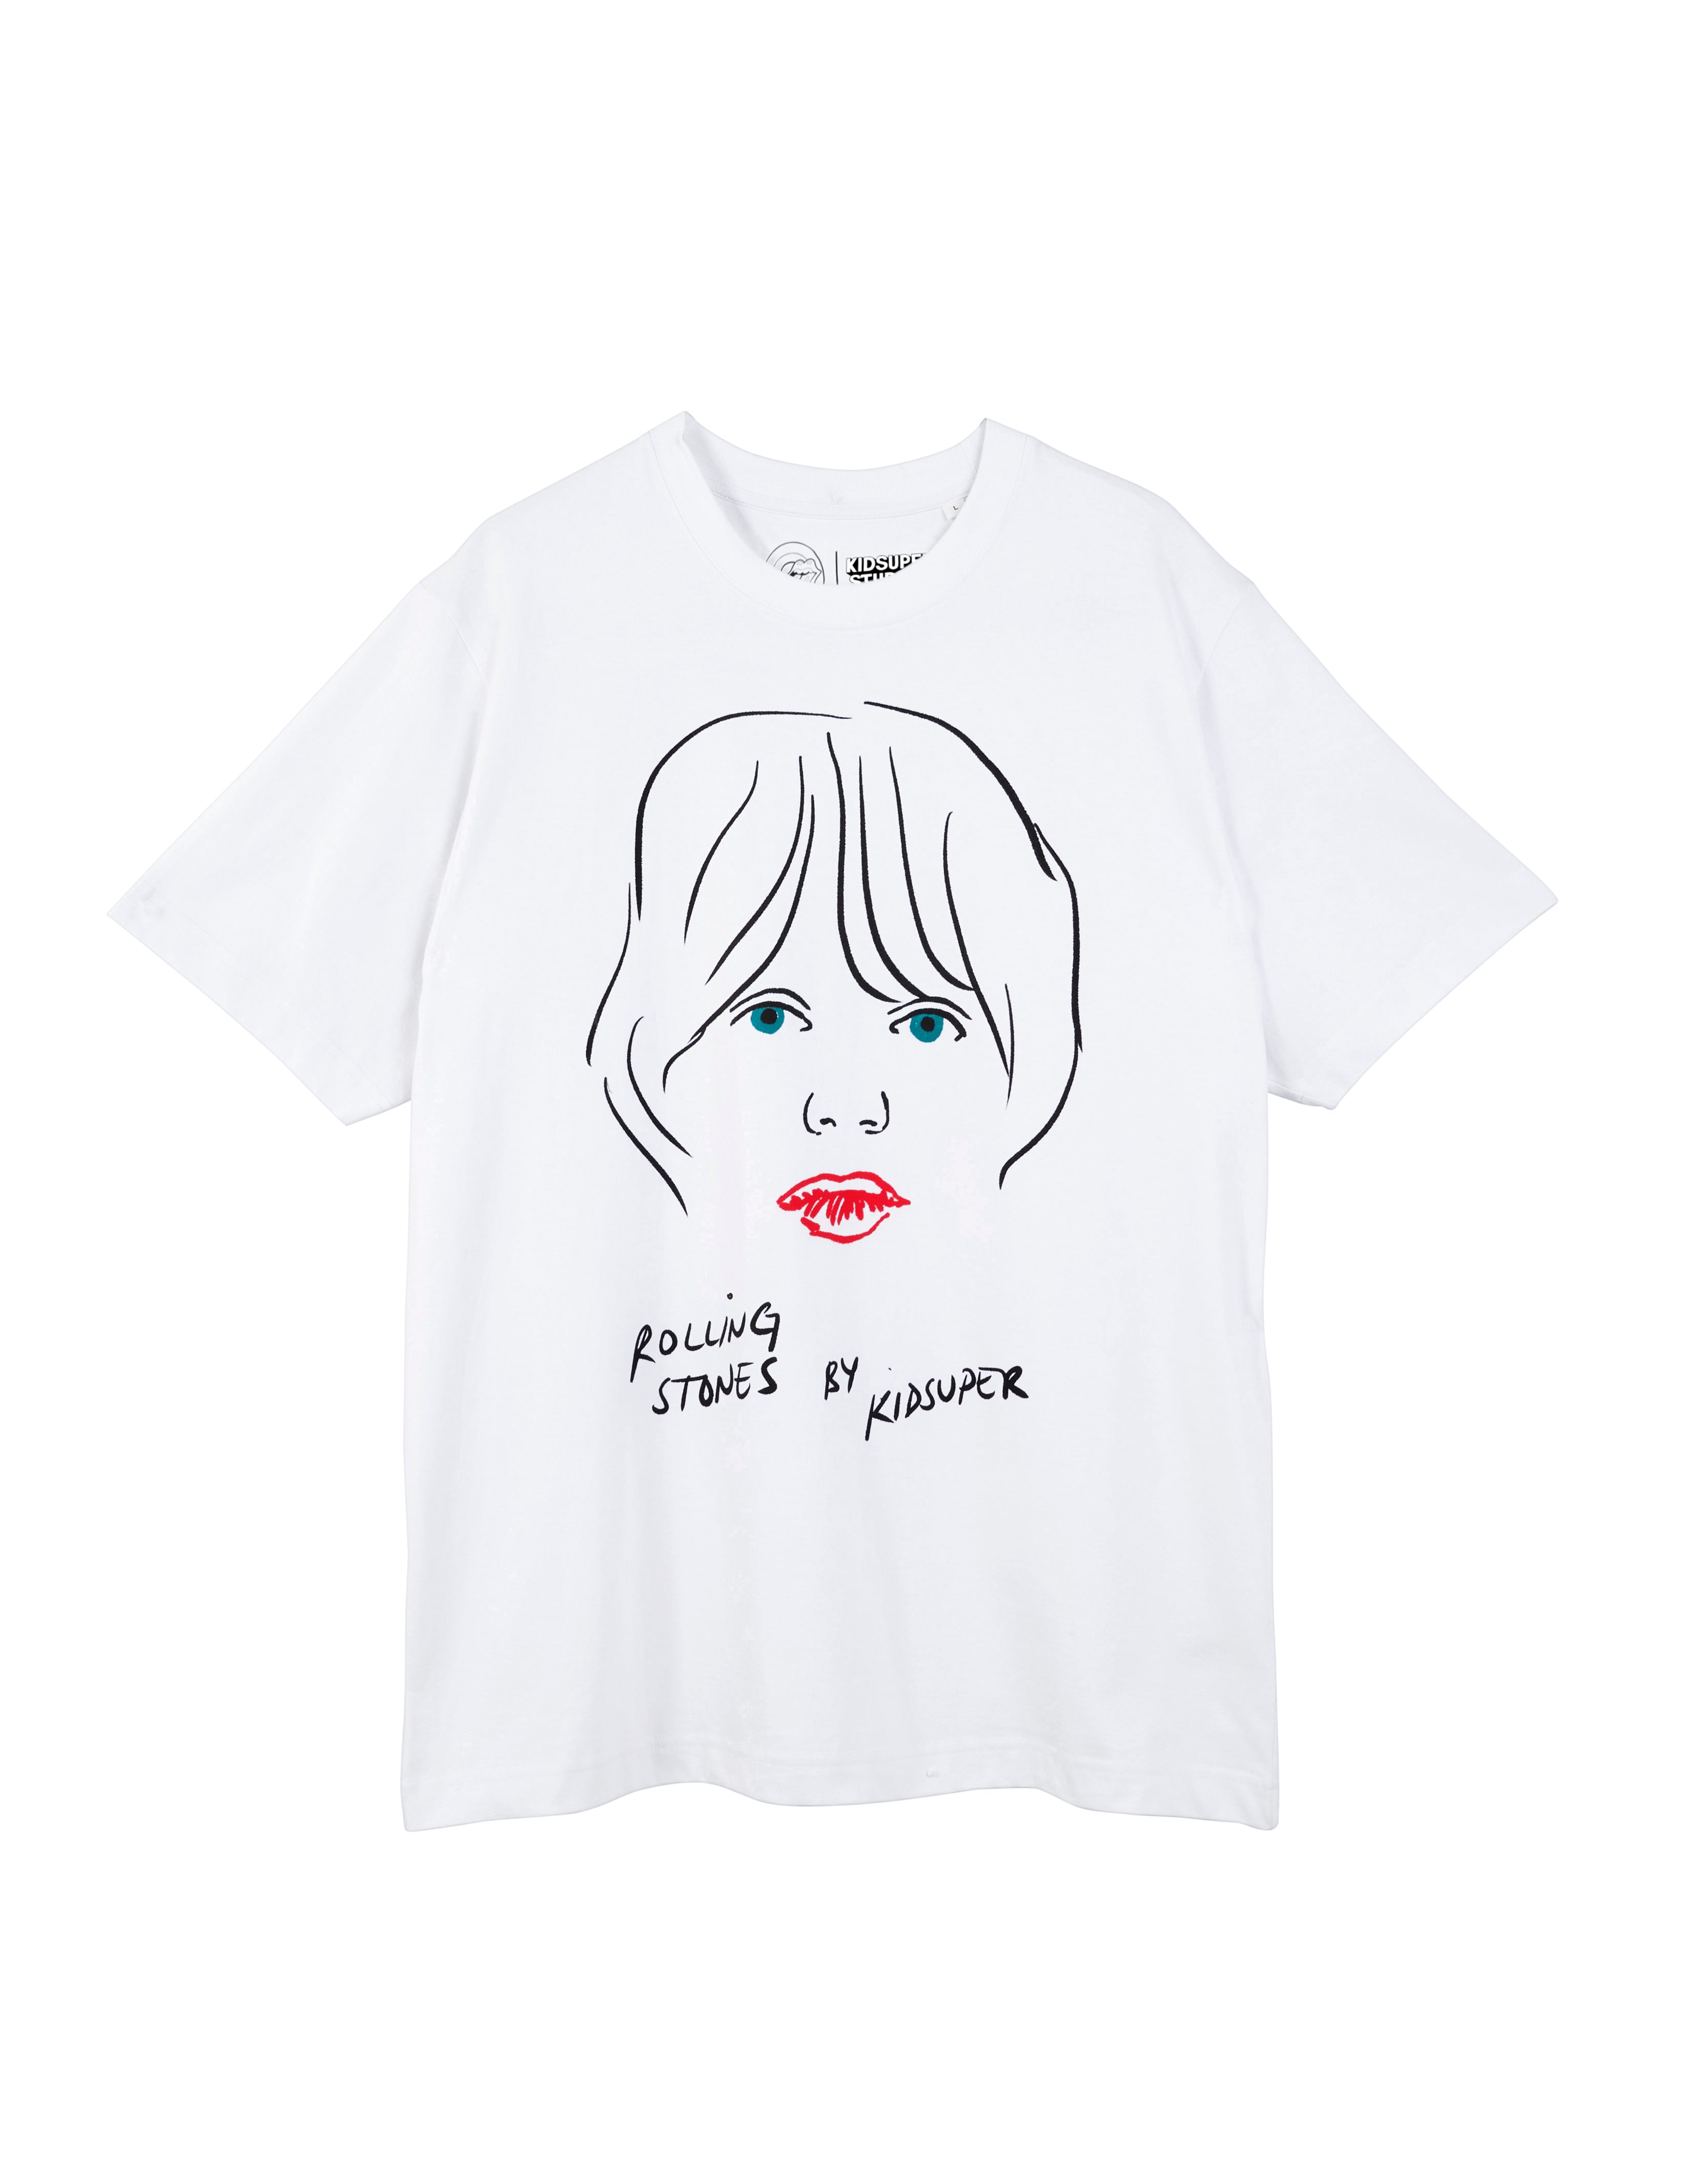 RS No. 9 Carnaby - RS No. 9 x KidSuper Mick Sketch White T-Shirt (UK Exclusive)